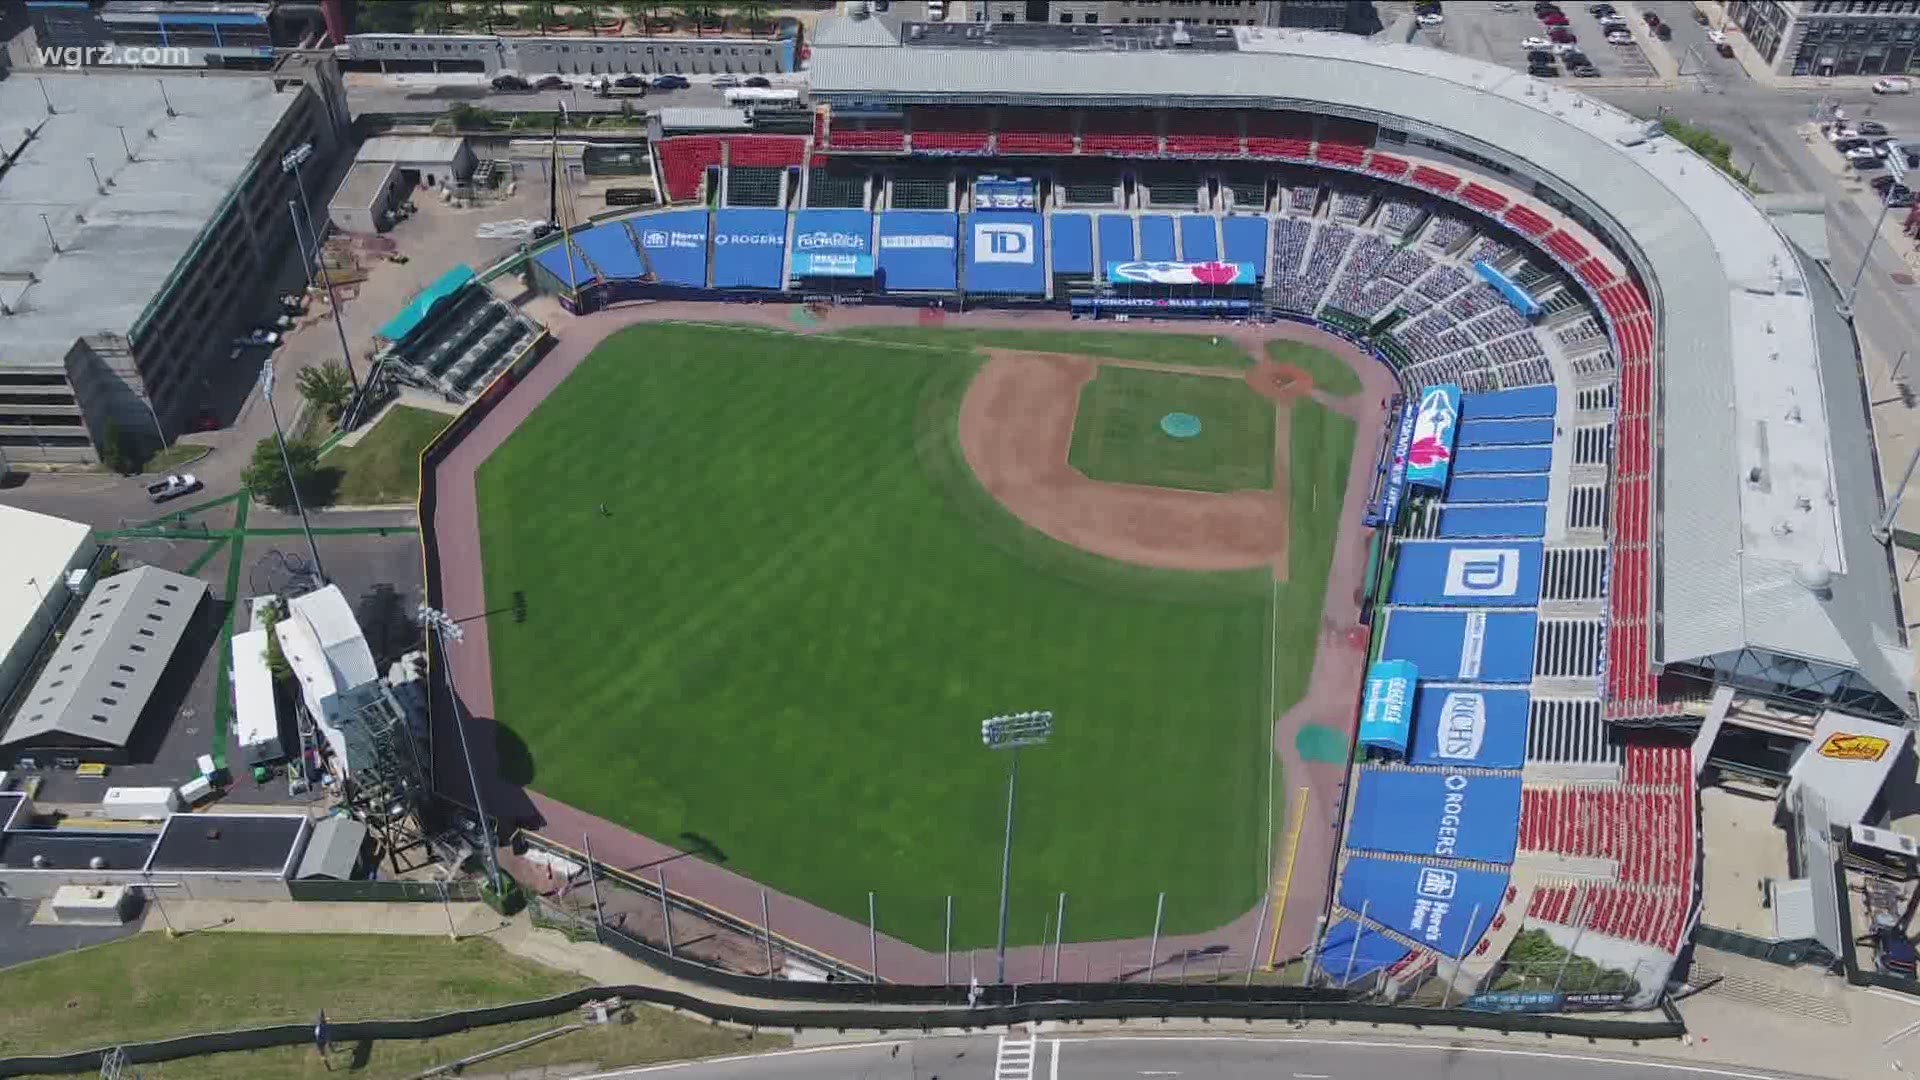 Blue Jays Ticket Sales In Buffalo Open To General Public Today